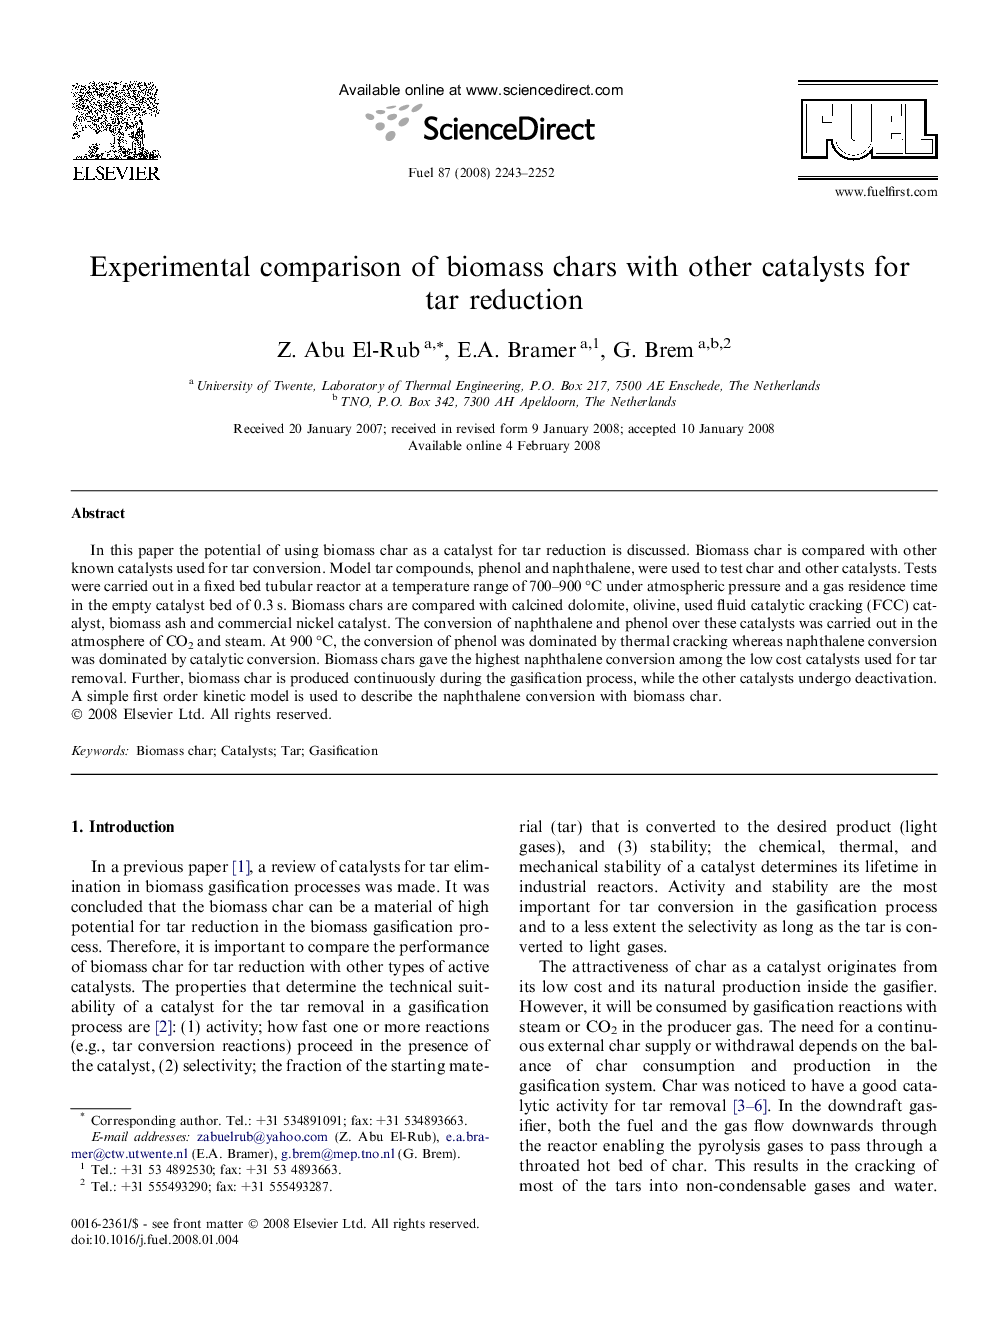 Experimental comparison of biomass chars with other catalysts for tar reduction